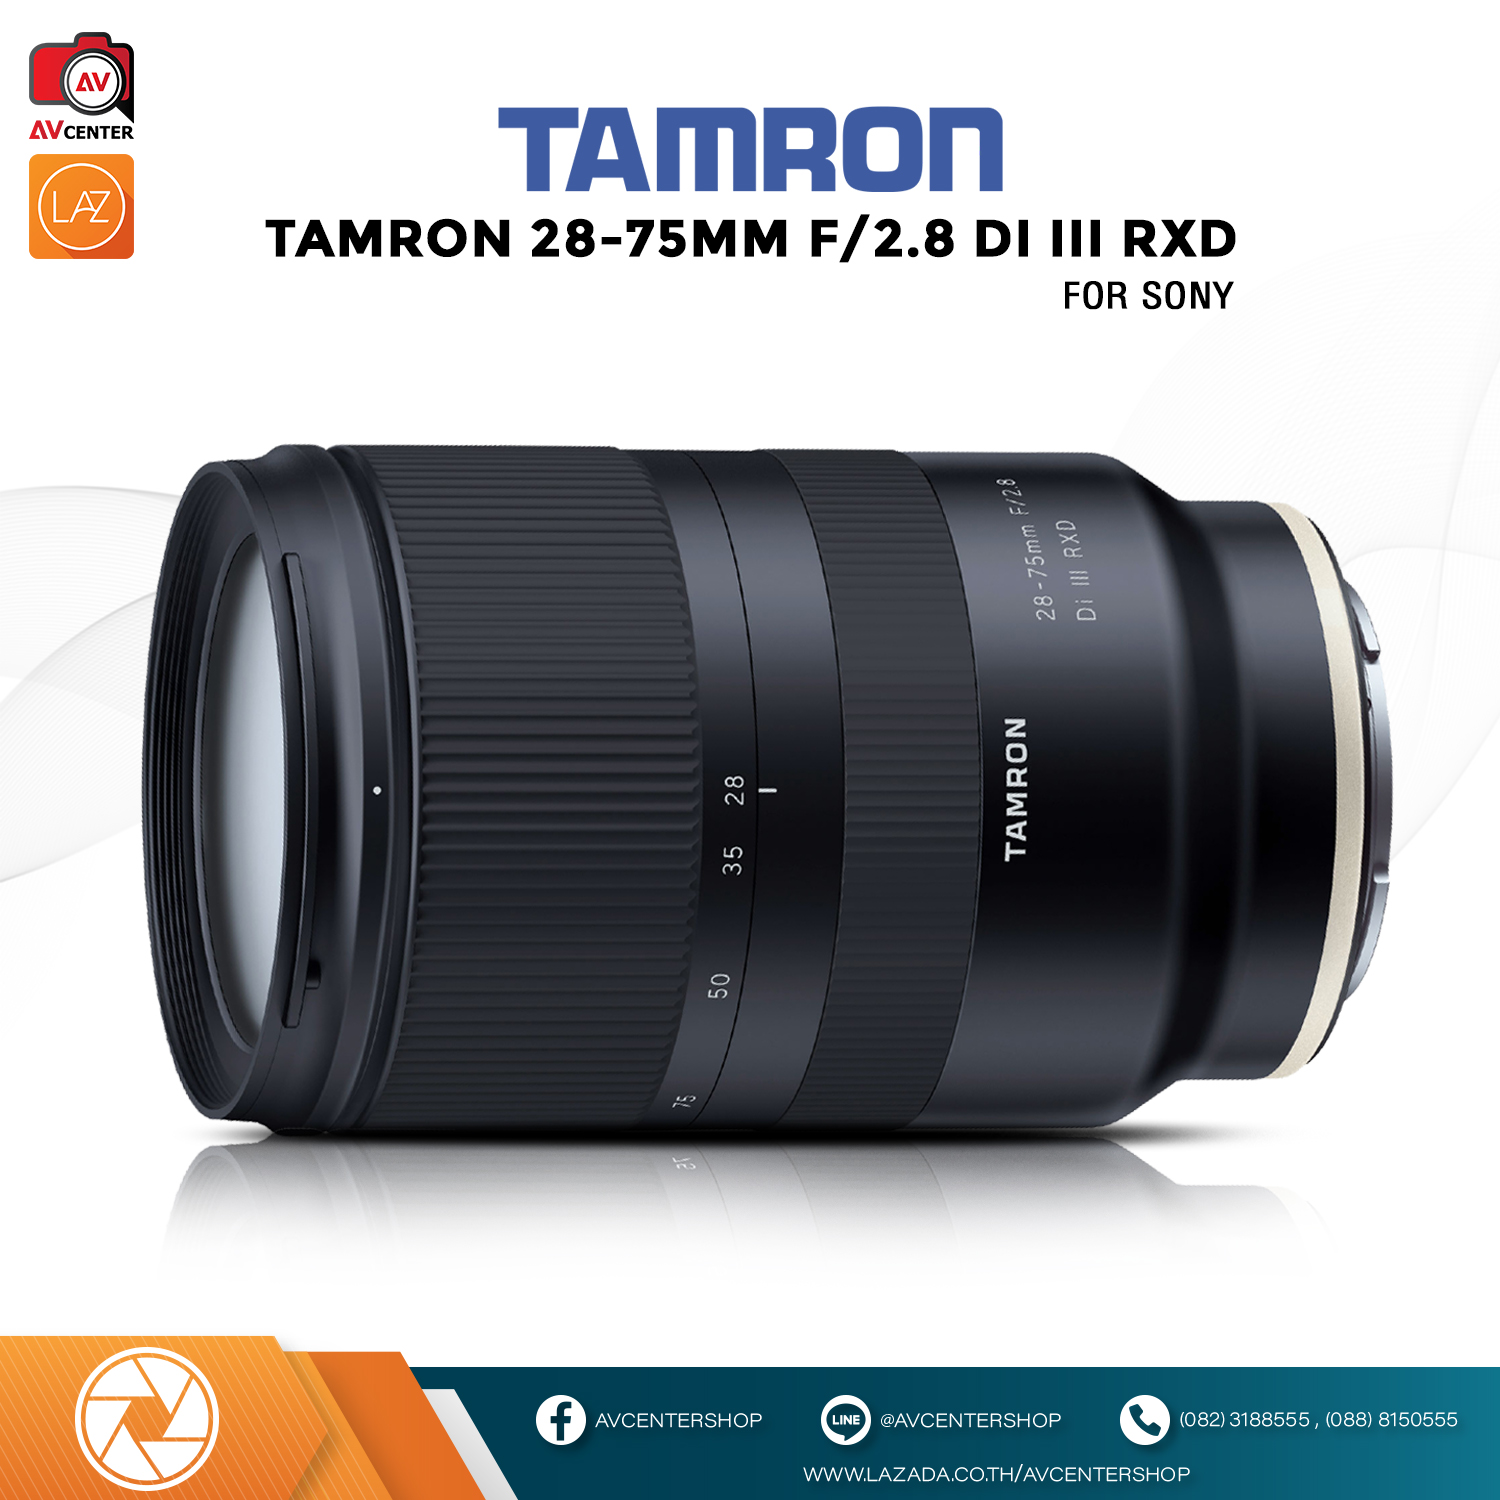 Tamron Lens 28-75 mm. F2.8 Di III RXD (For Sony FE)   [รับประกัน 1 ปี by AVcentershop]